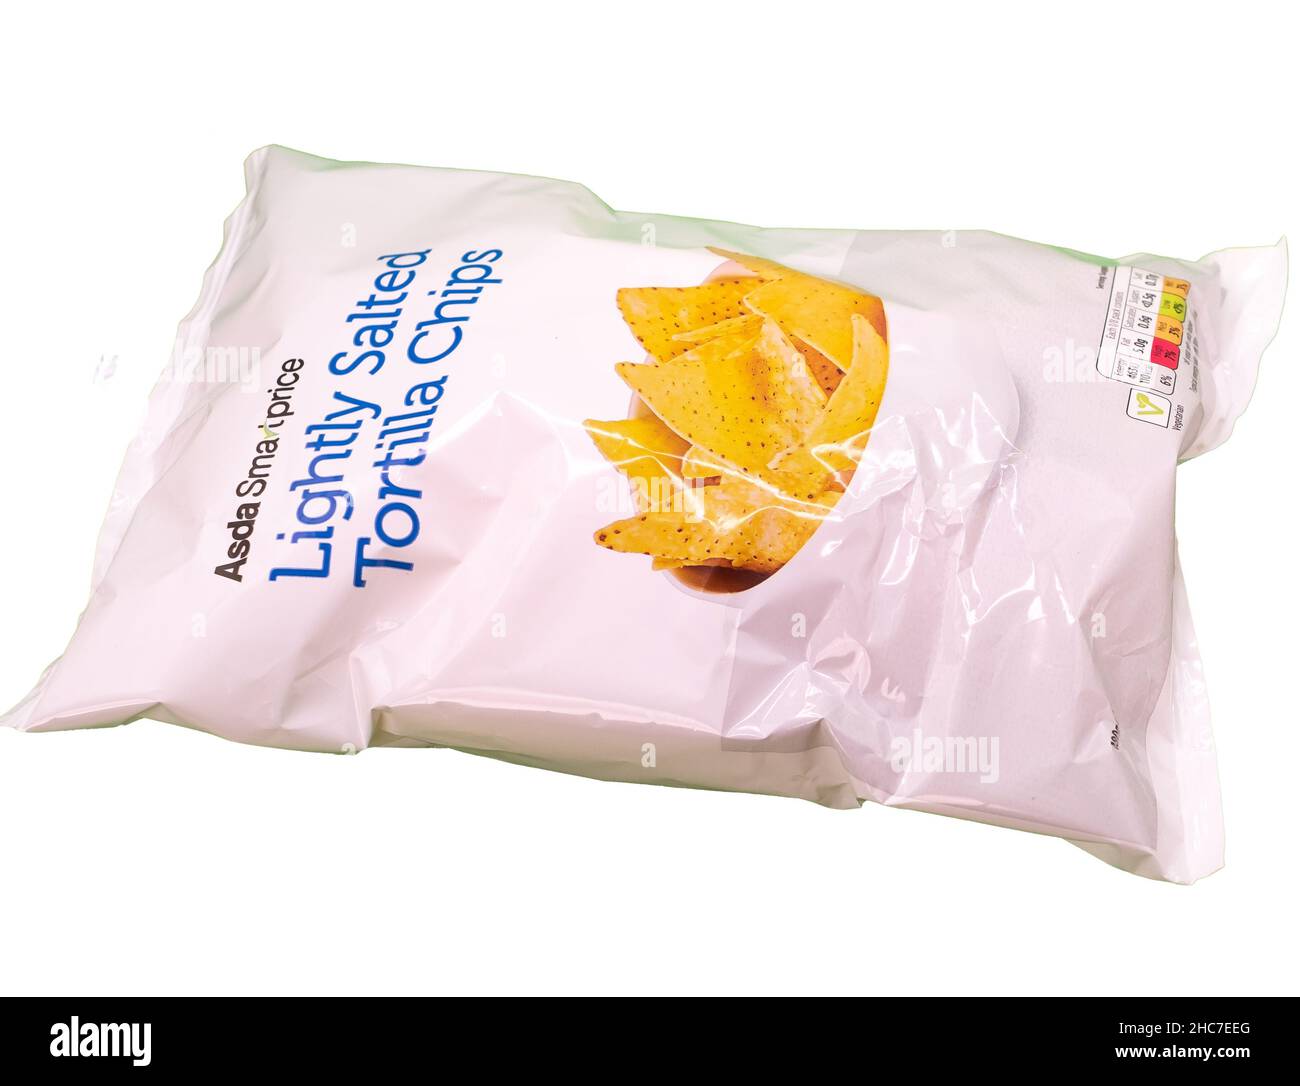 Salted crisps packet Cut Out Stock Images & Pictures - Page 2 - Alamy